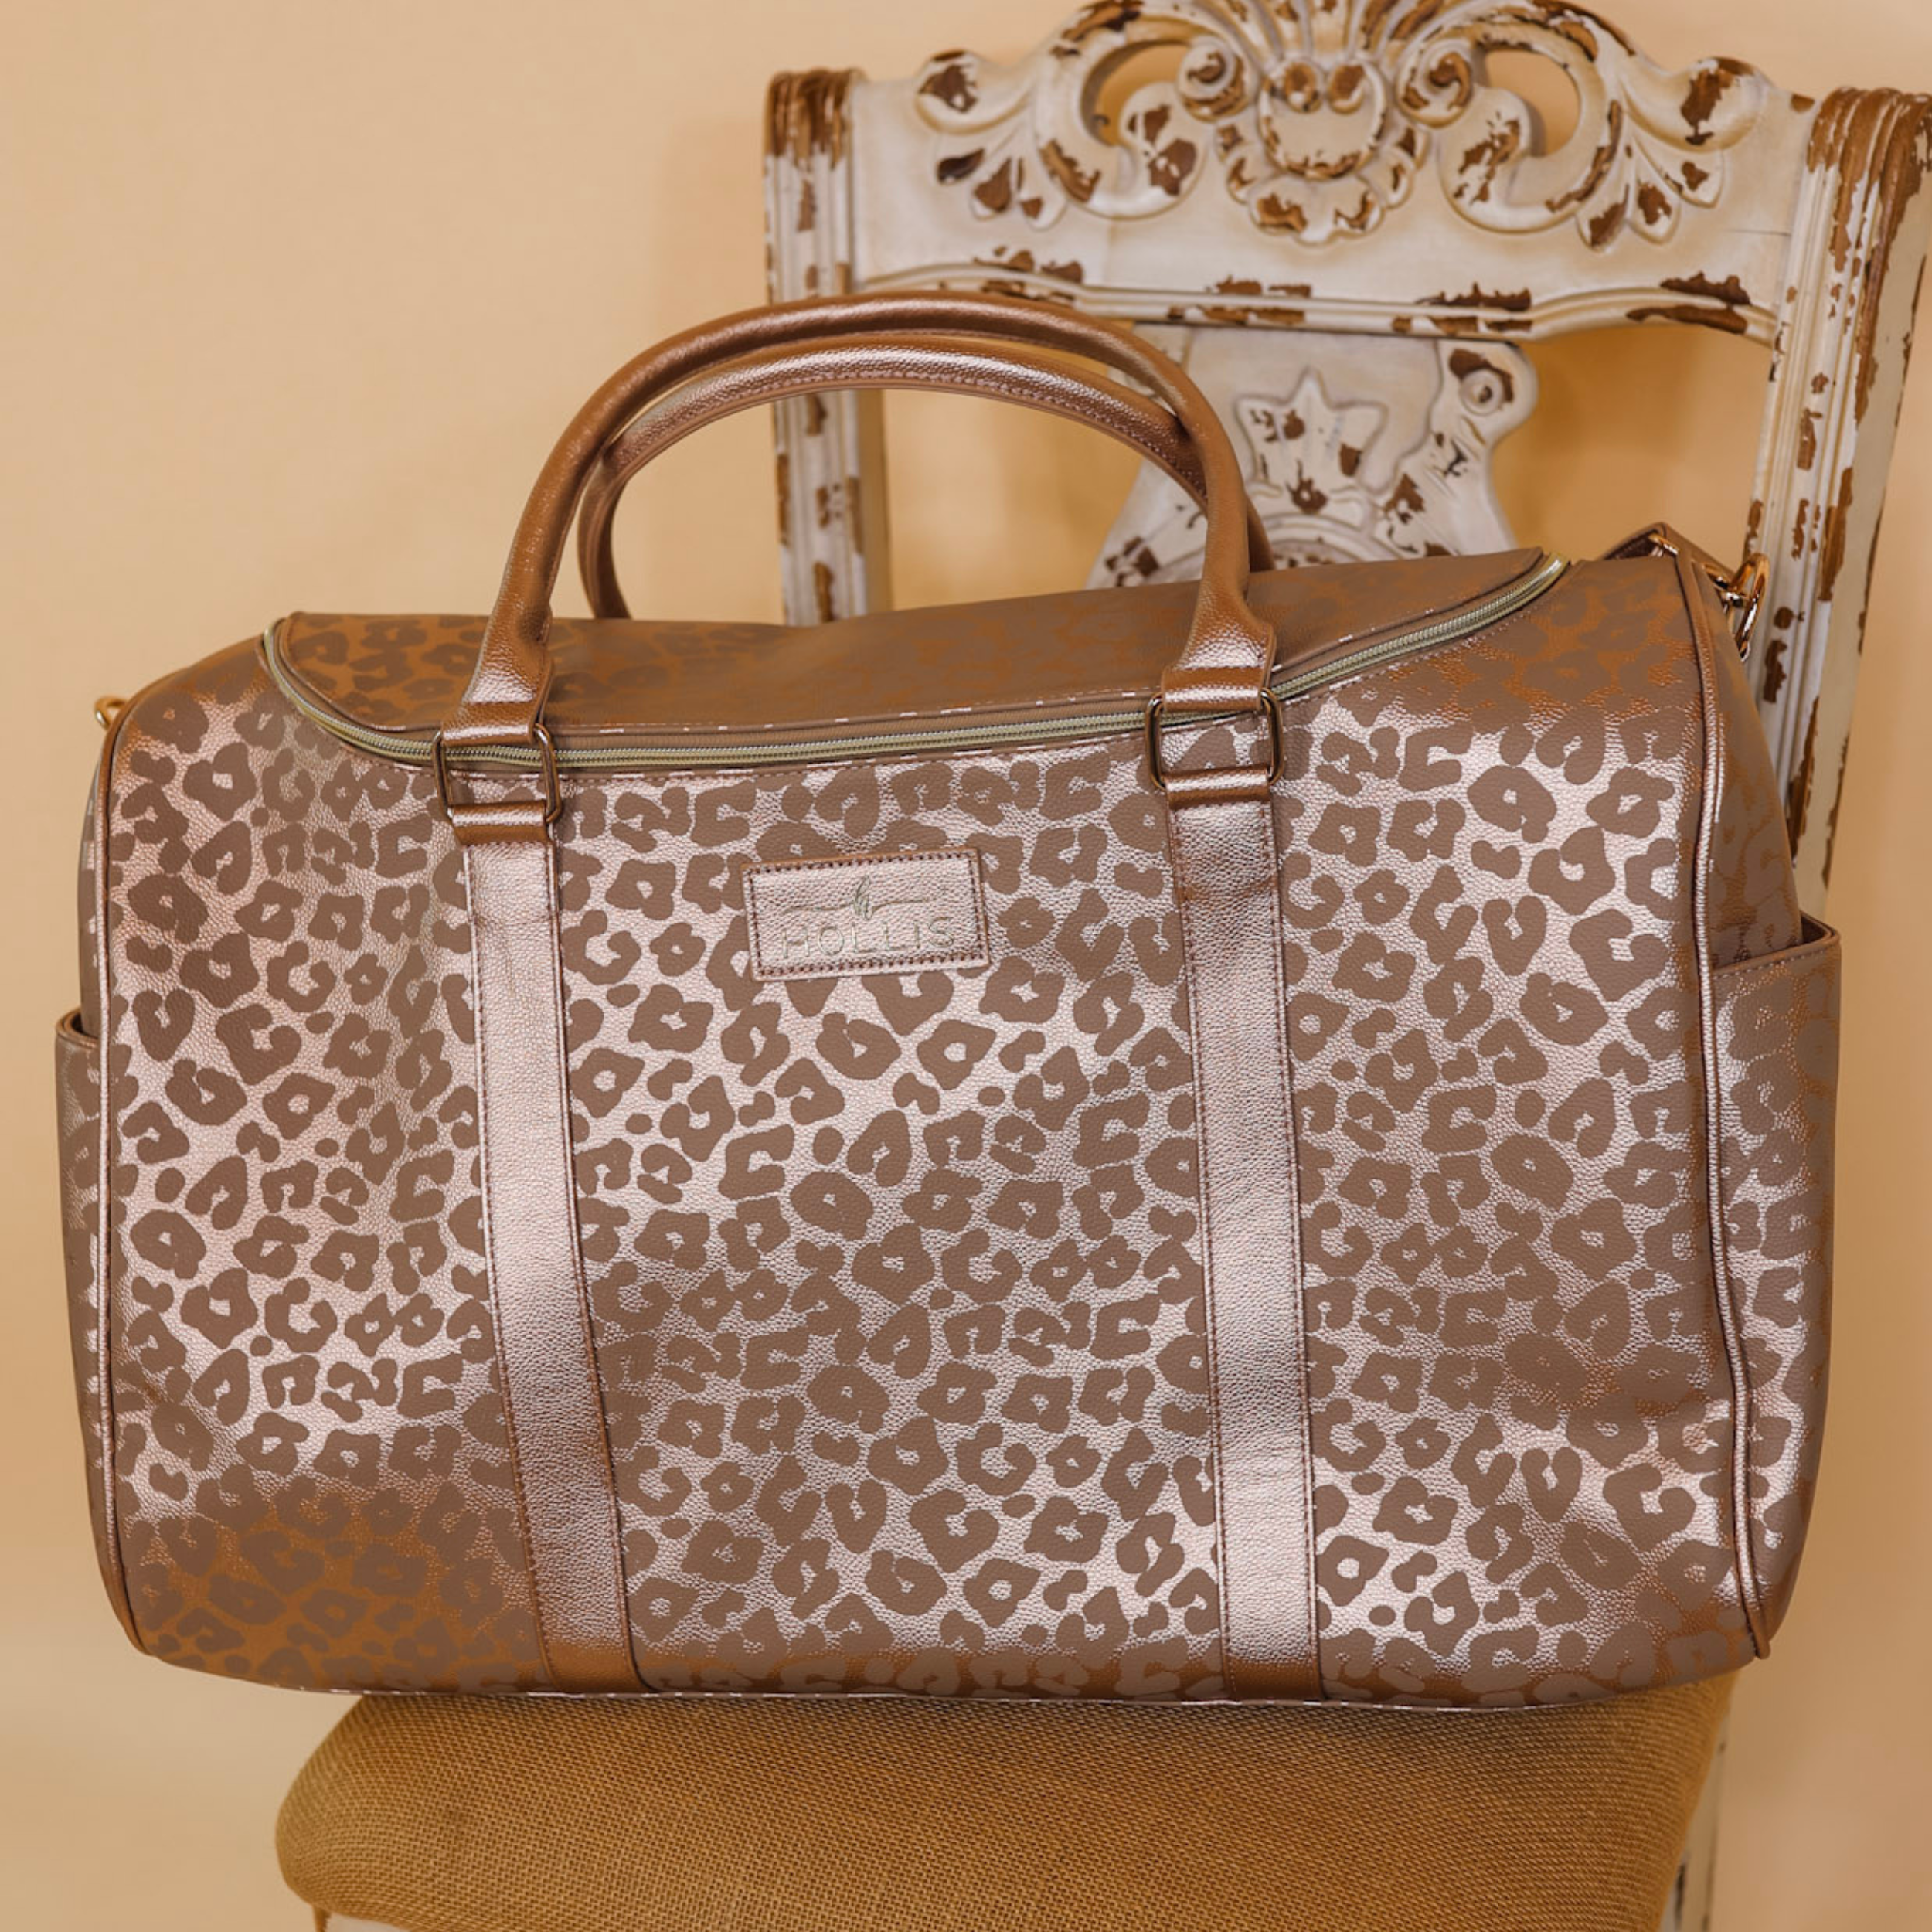 A large weekender bag is set on a chair in a leopard print. The background is solid tan. 